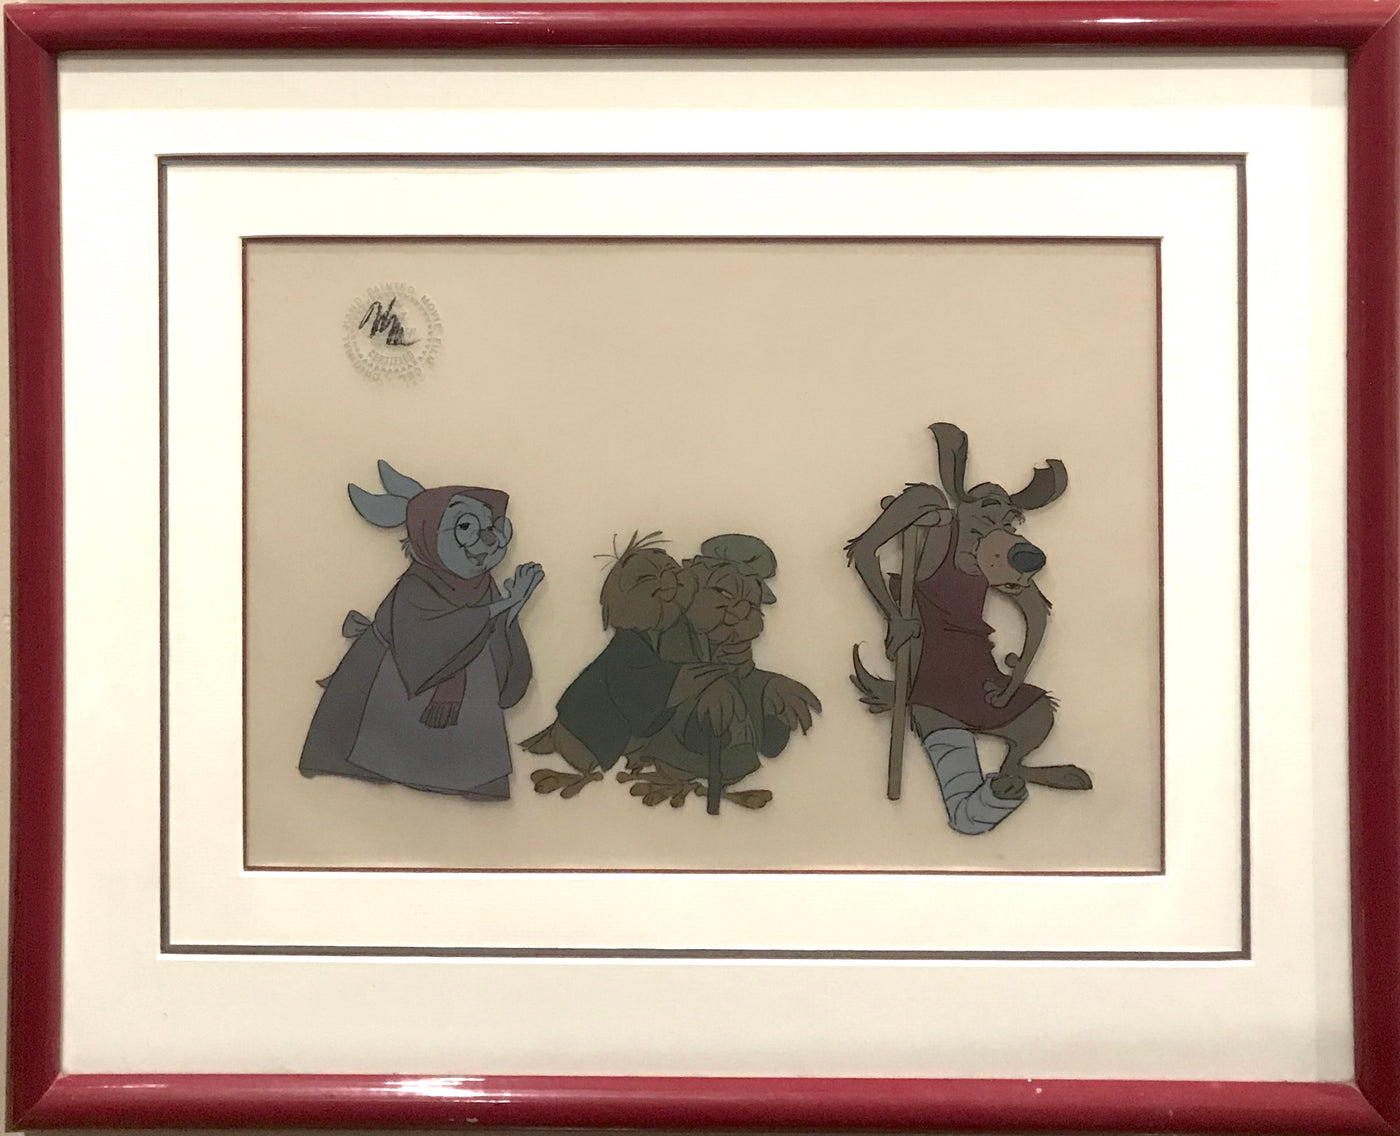 Original Disney Production Cel from Robin Hood featuring Mother Rabbit and Otto